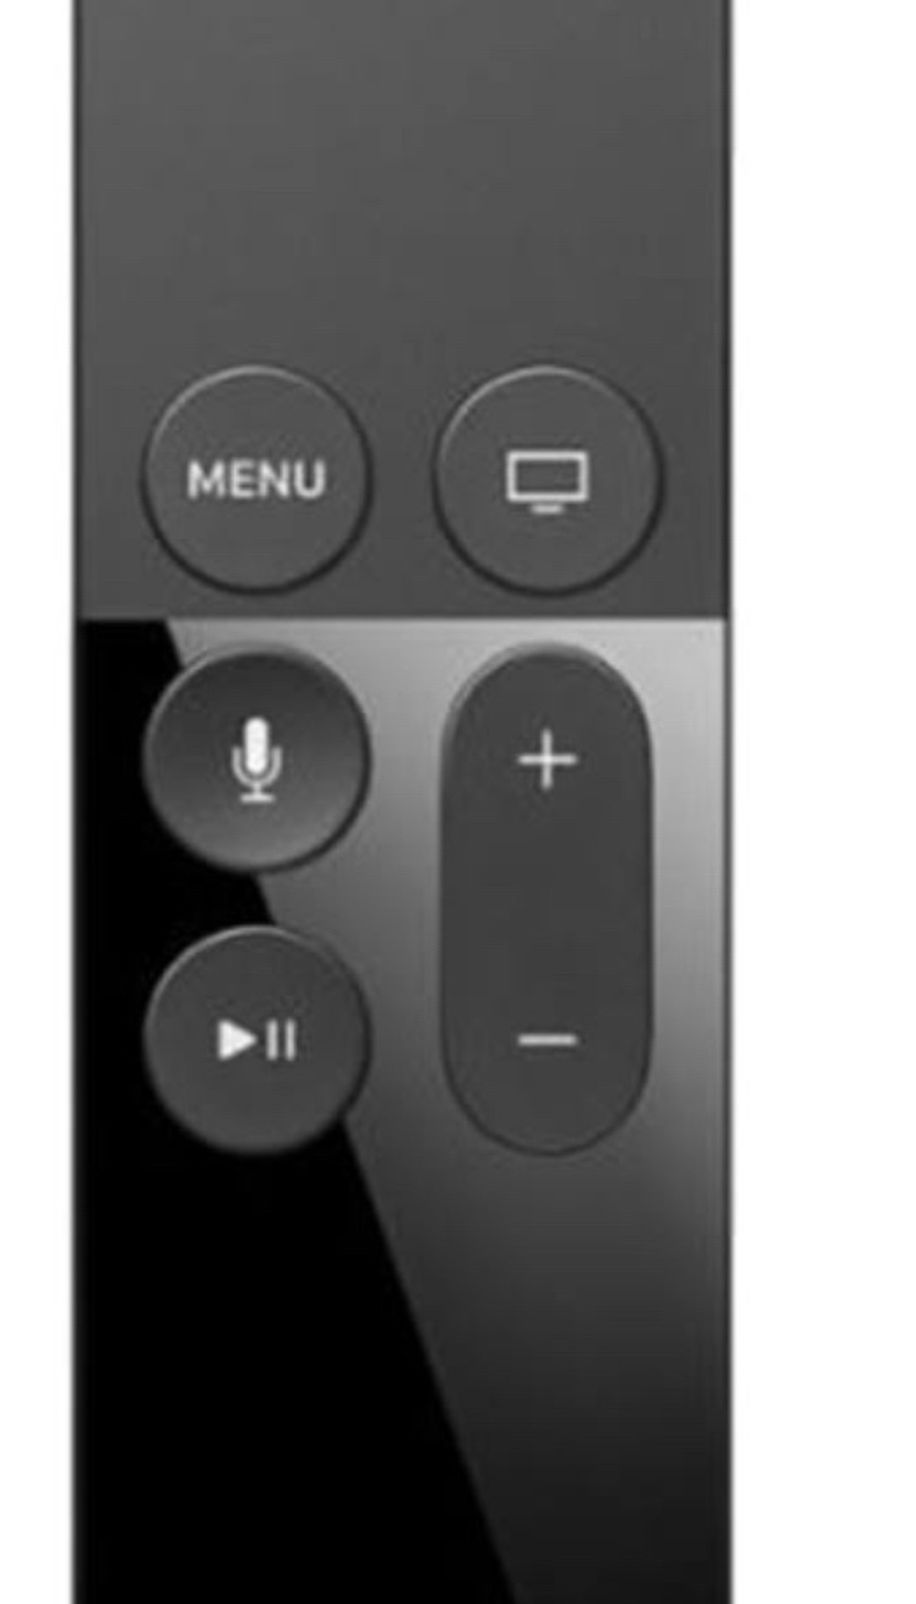 Genuine For Apple TV 4th Generation Remote Control MLLC2LL/A EMC2677 A1513(used，free case)